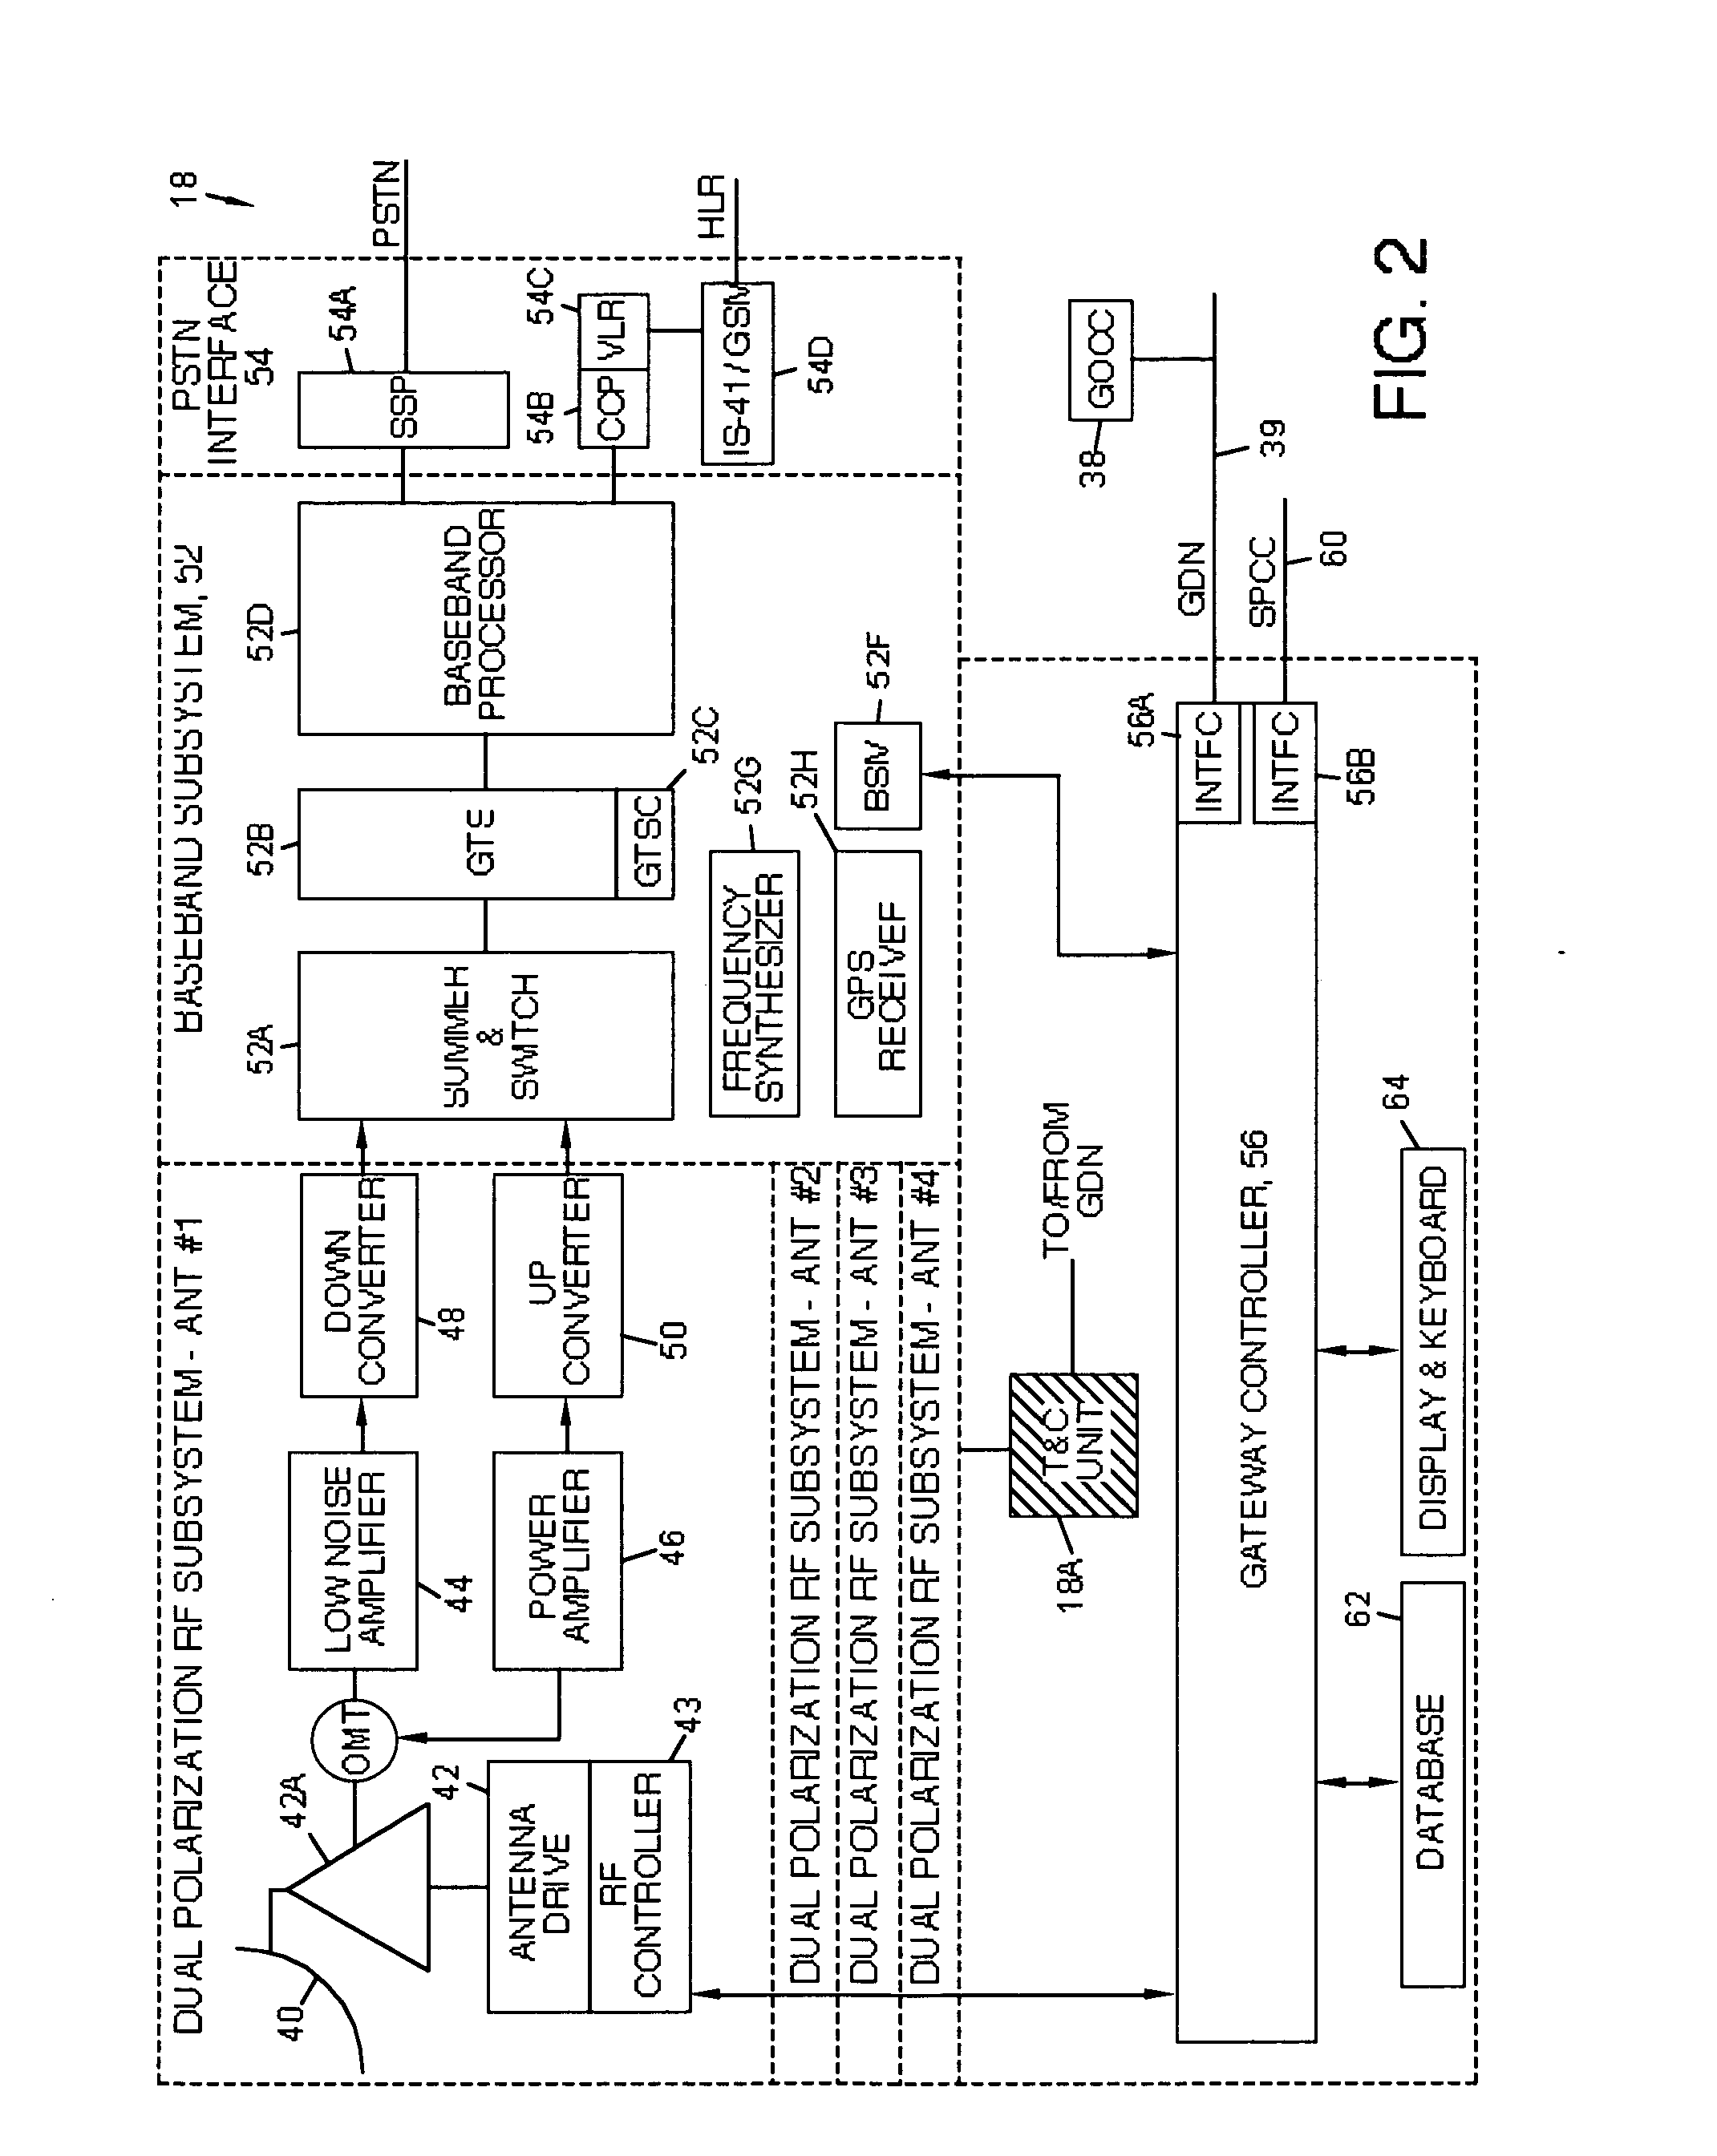 Satellite communication system employing a combination of time division multiplexing and non-orthogonal pseudorandom noise codes and time slots